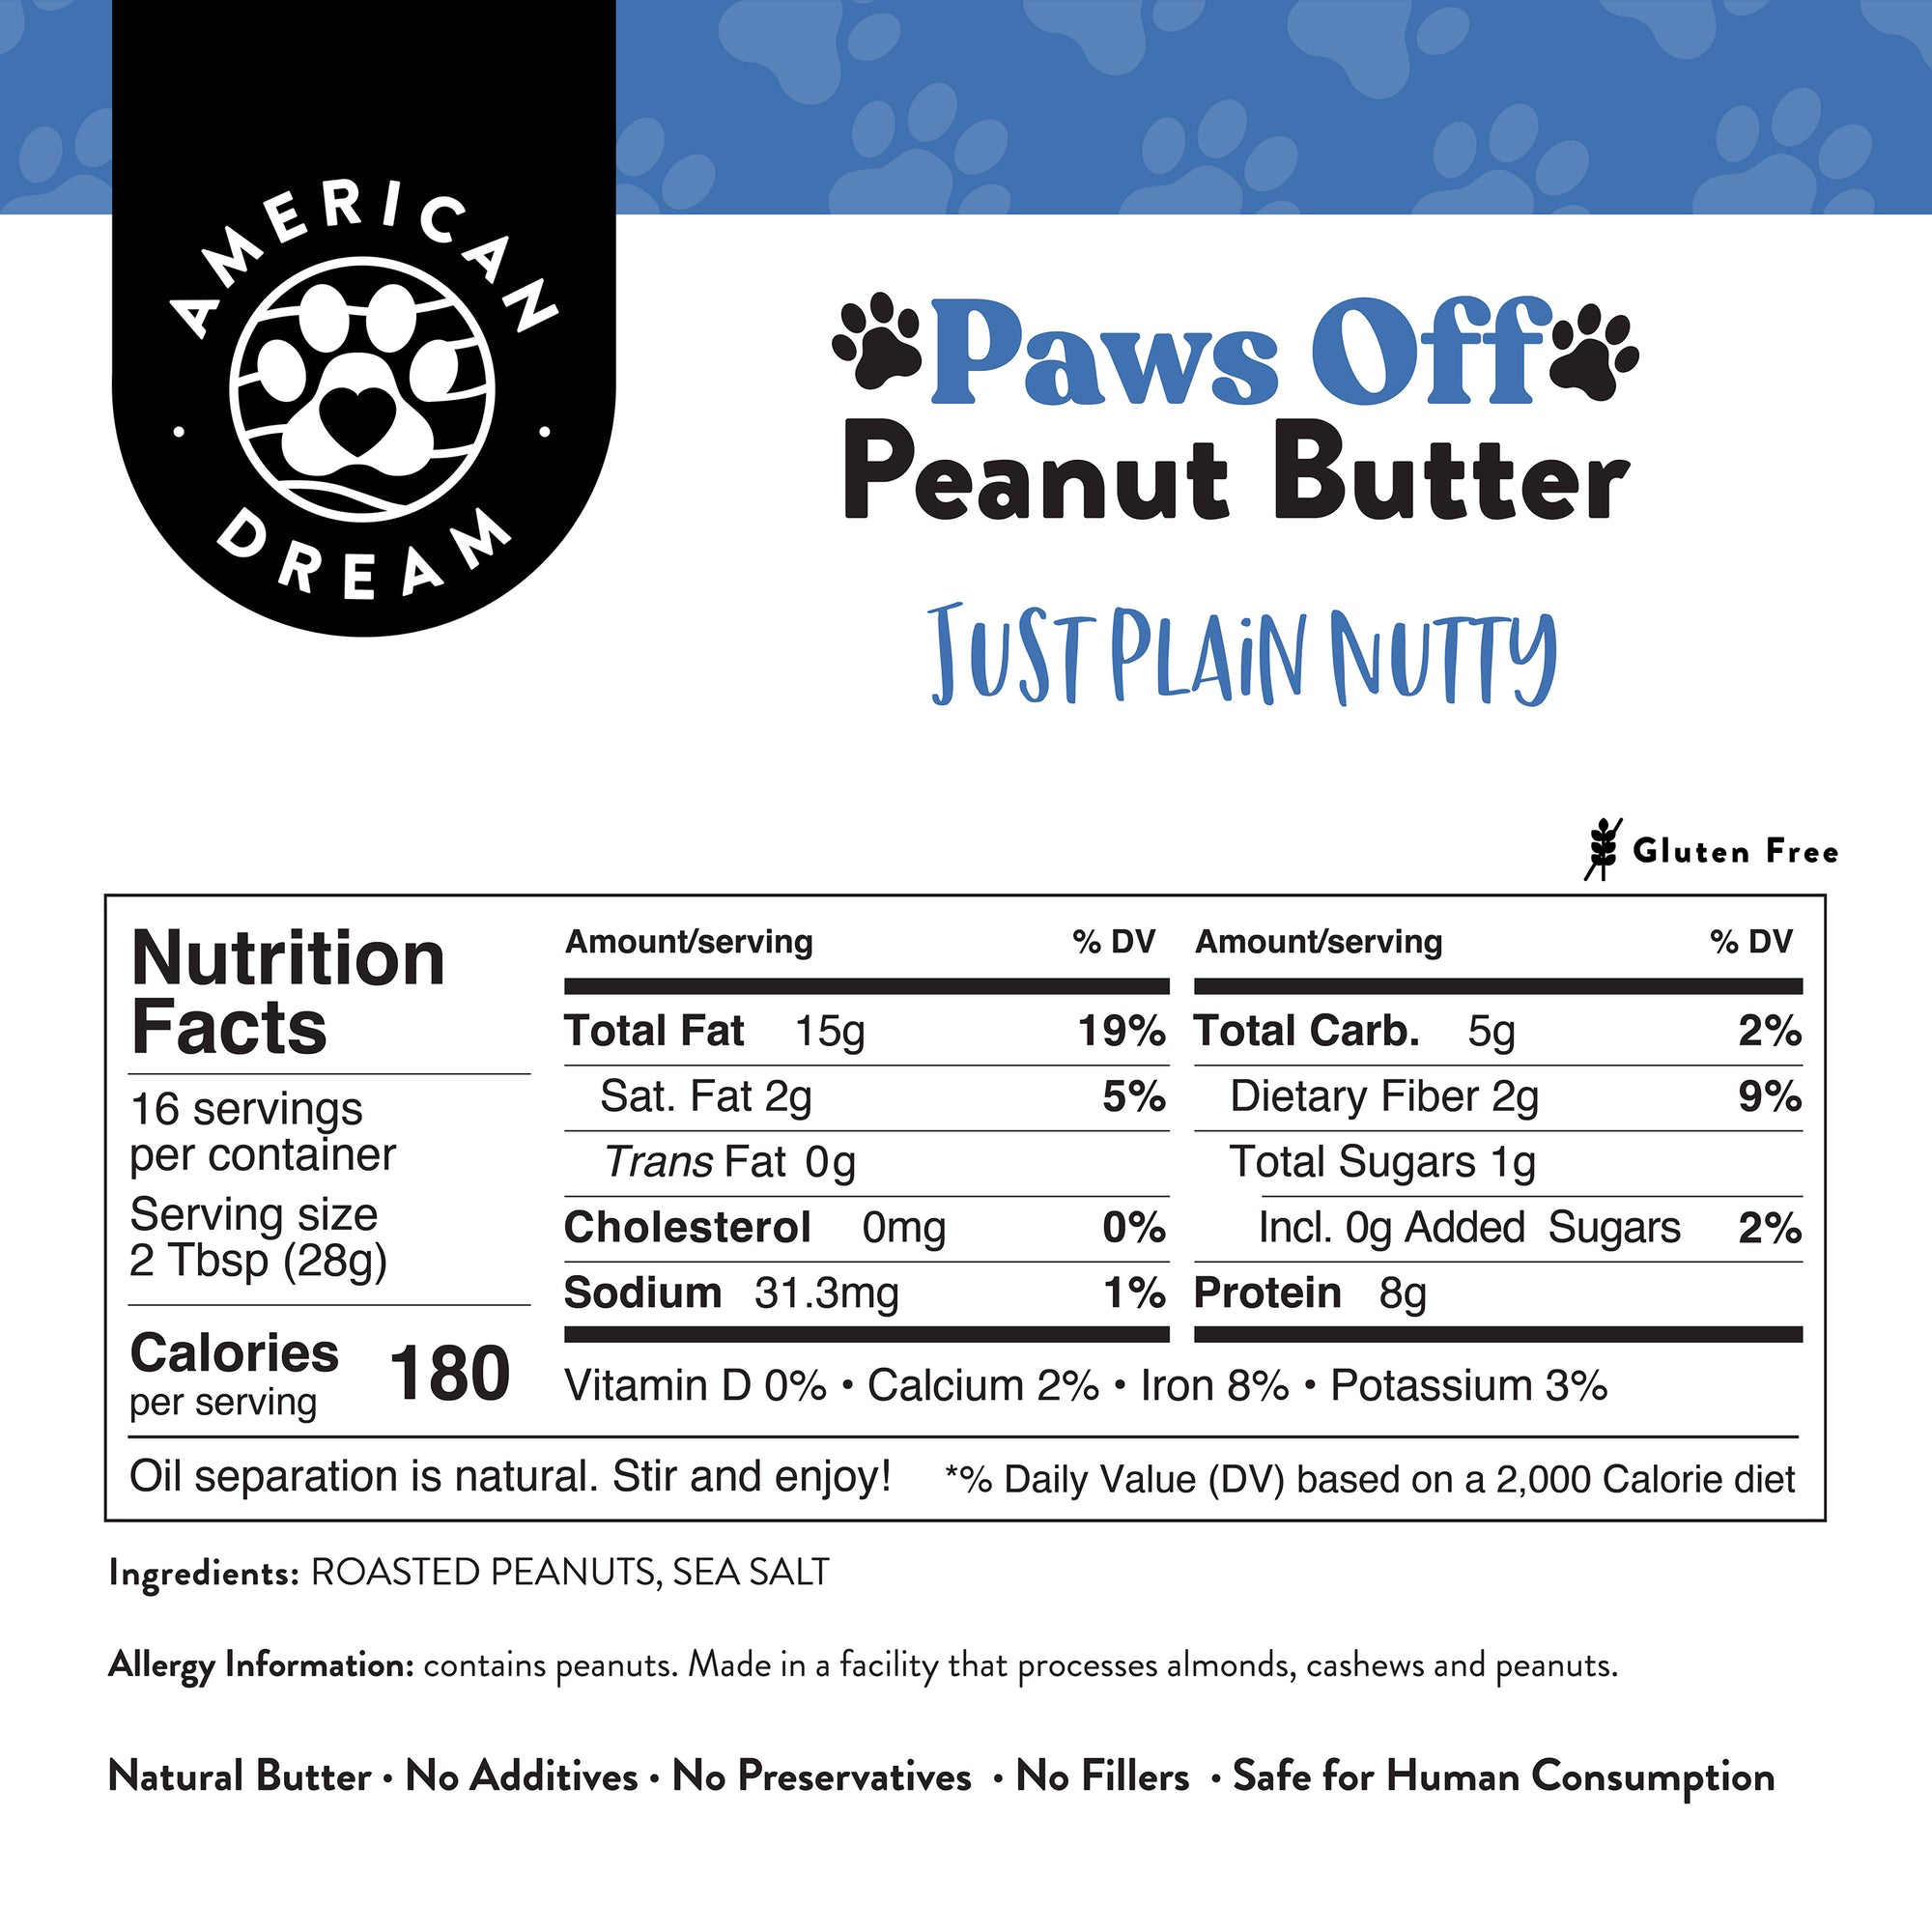 Gluten-Free Paws Off Just Plain Nutty Peanut Butter